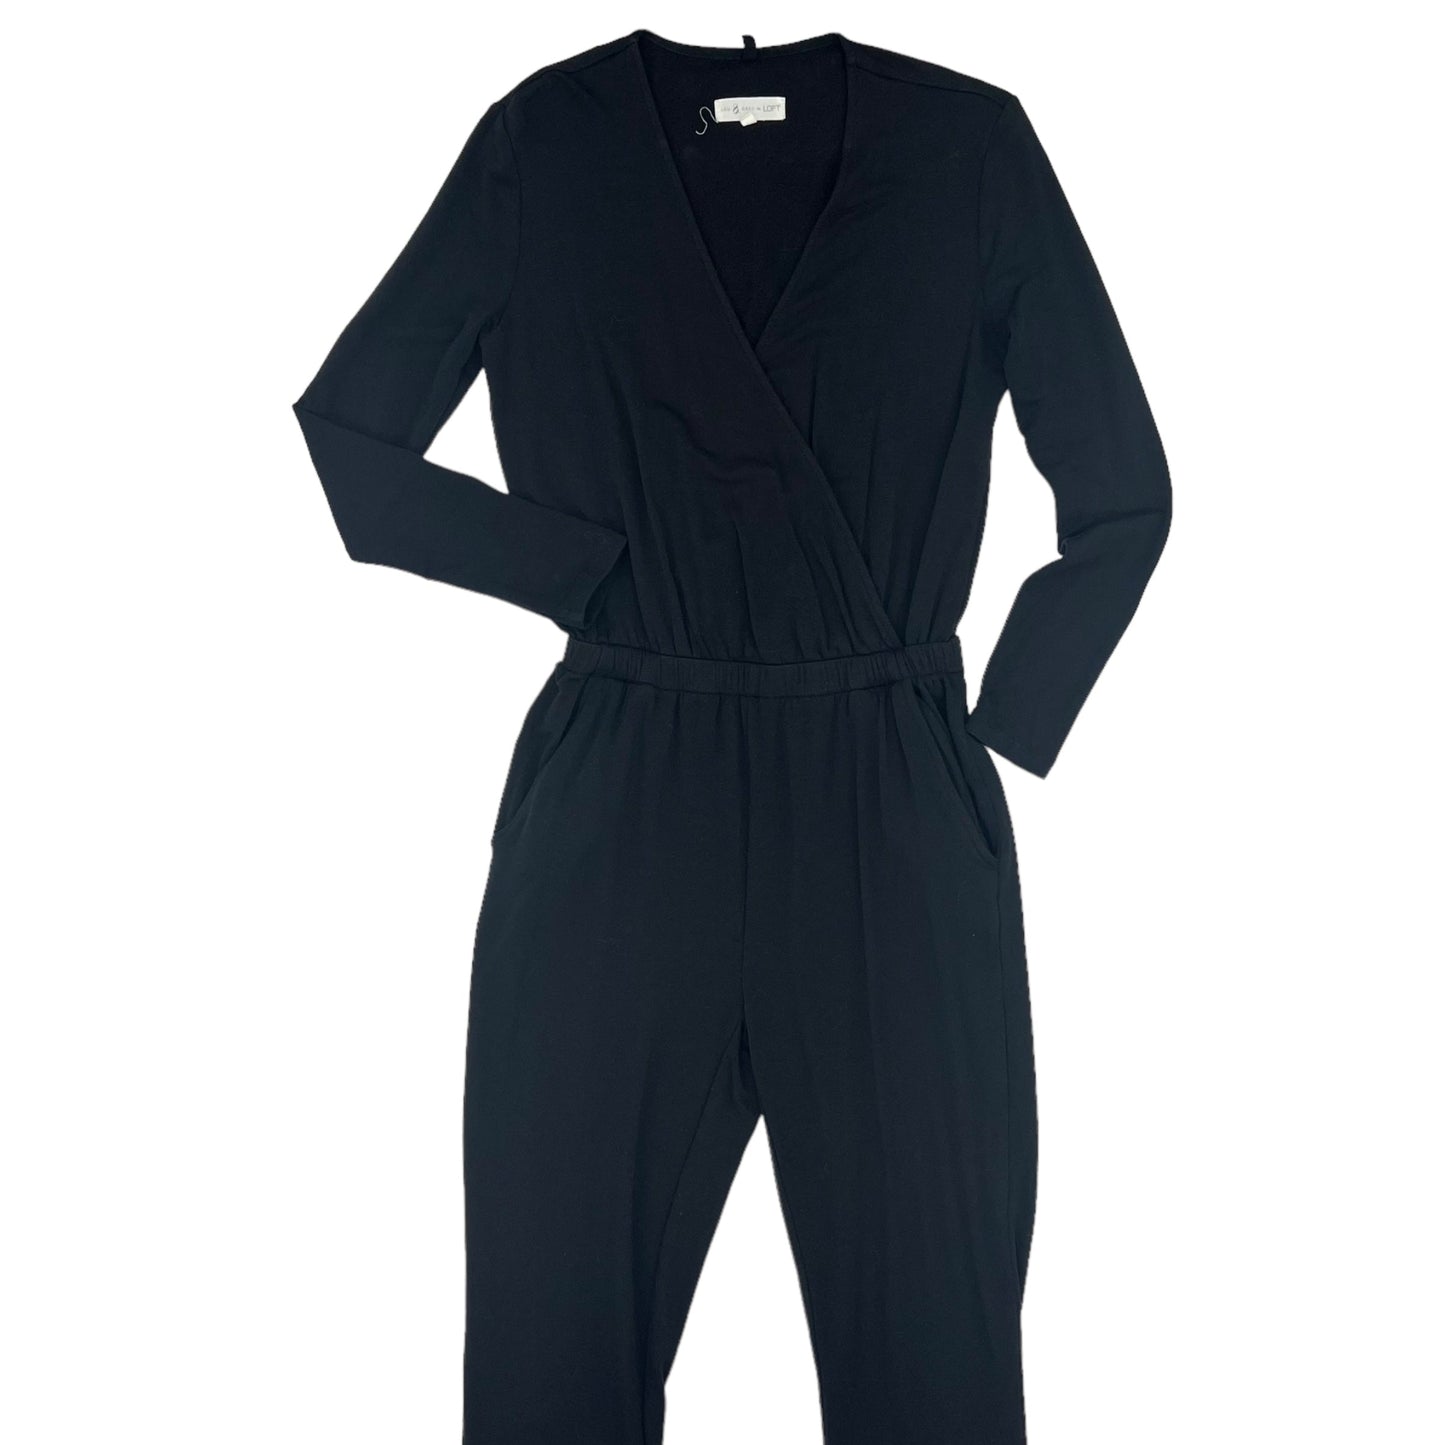 BLACK LOU AND GREY JUMPSUIT, Size XS